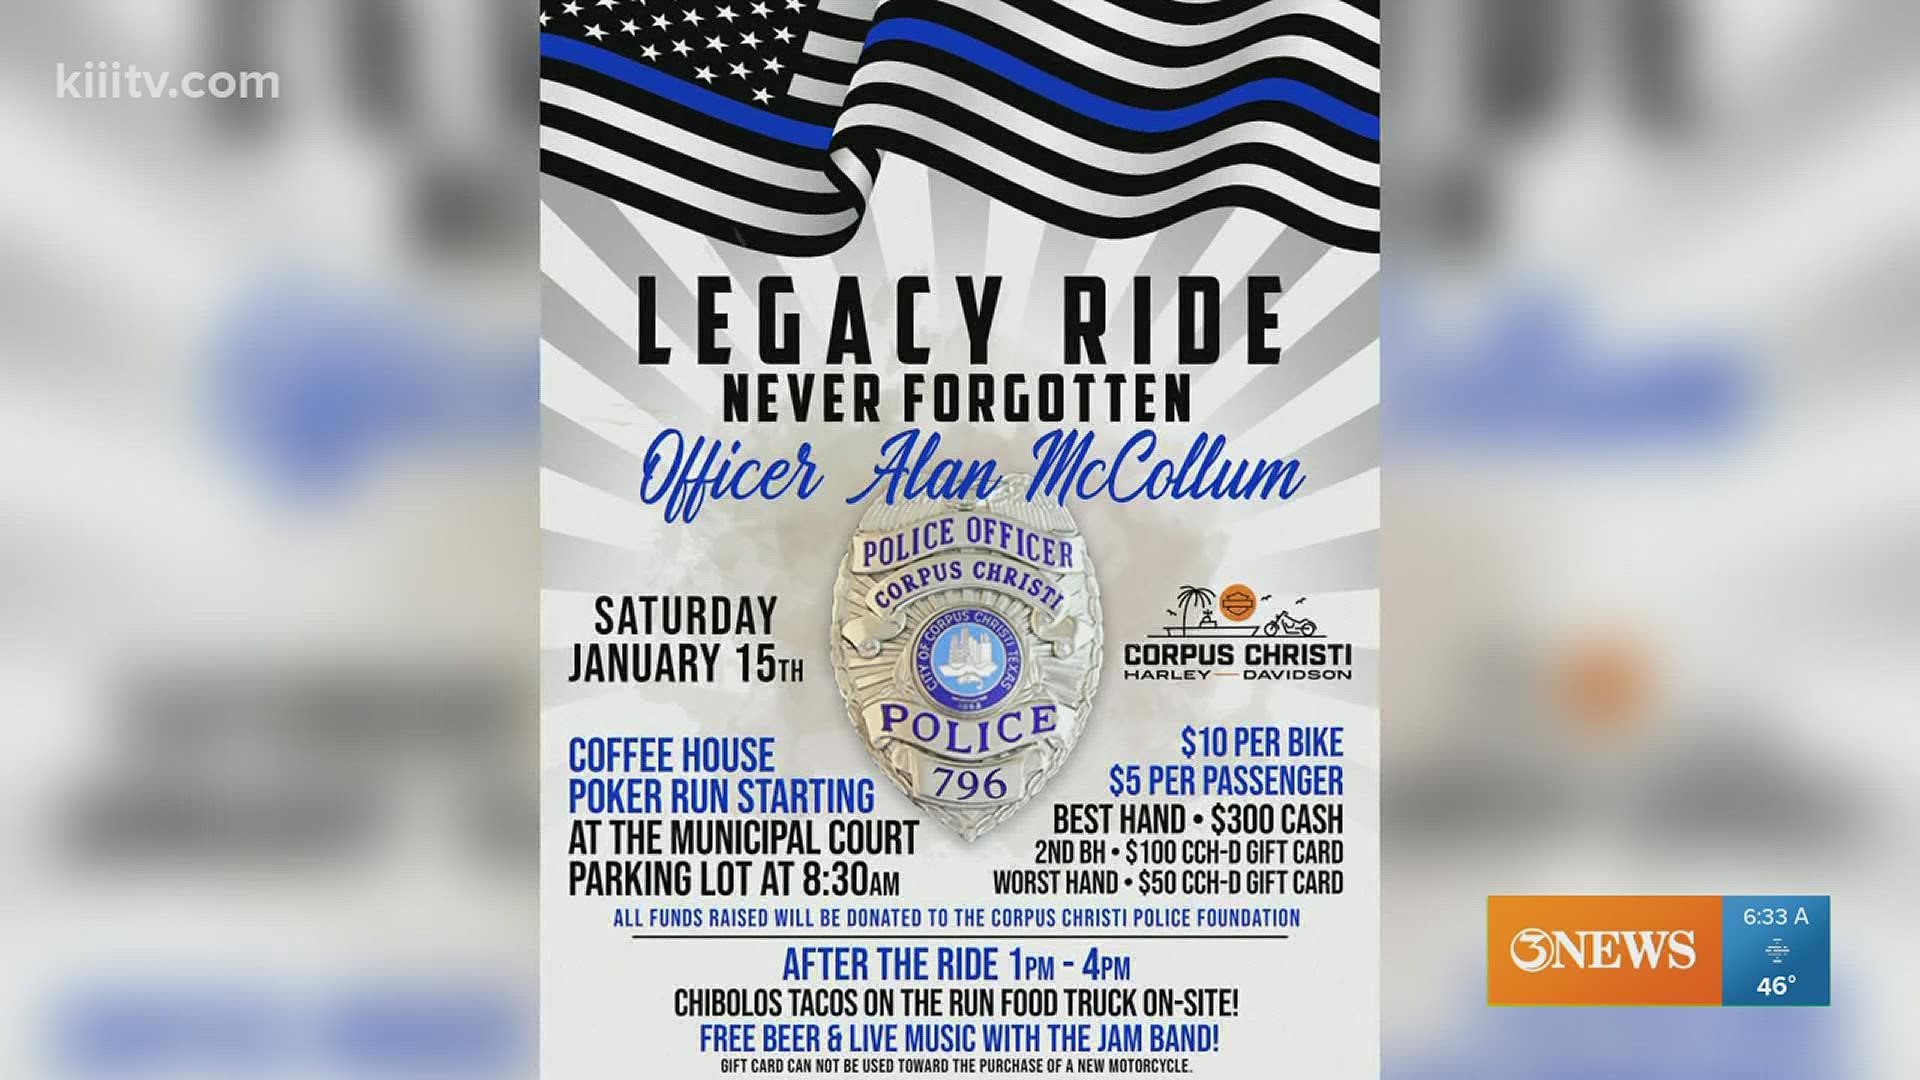 Registration for the legacy ride will begin at 8:30 a.m. at the Municipal Court parking lot.